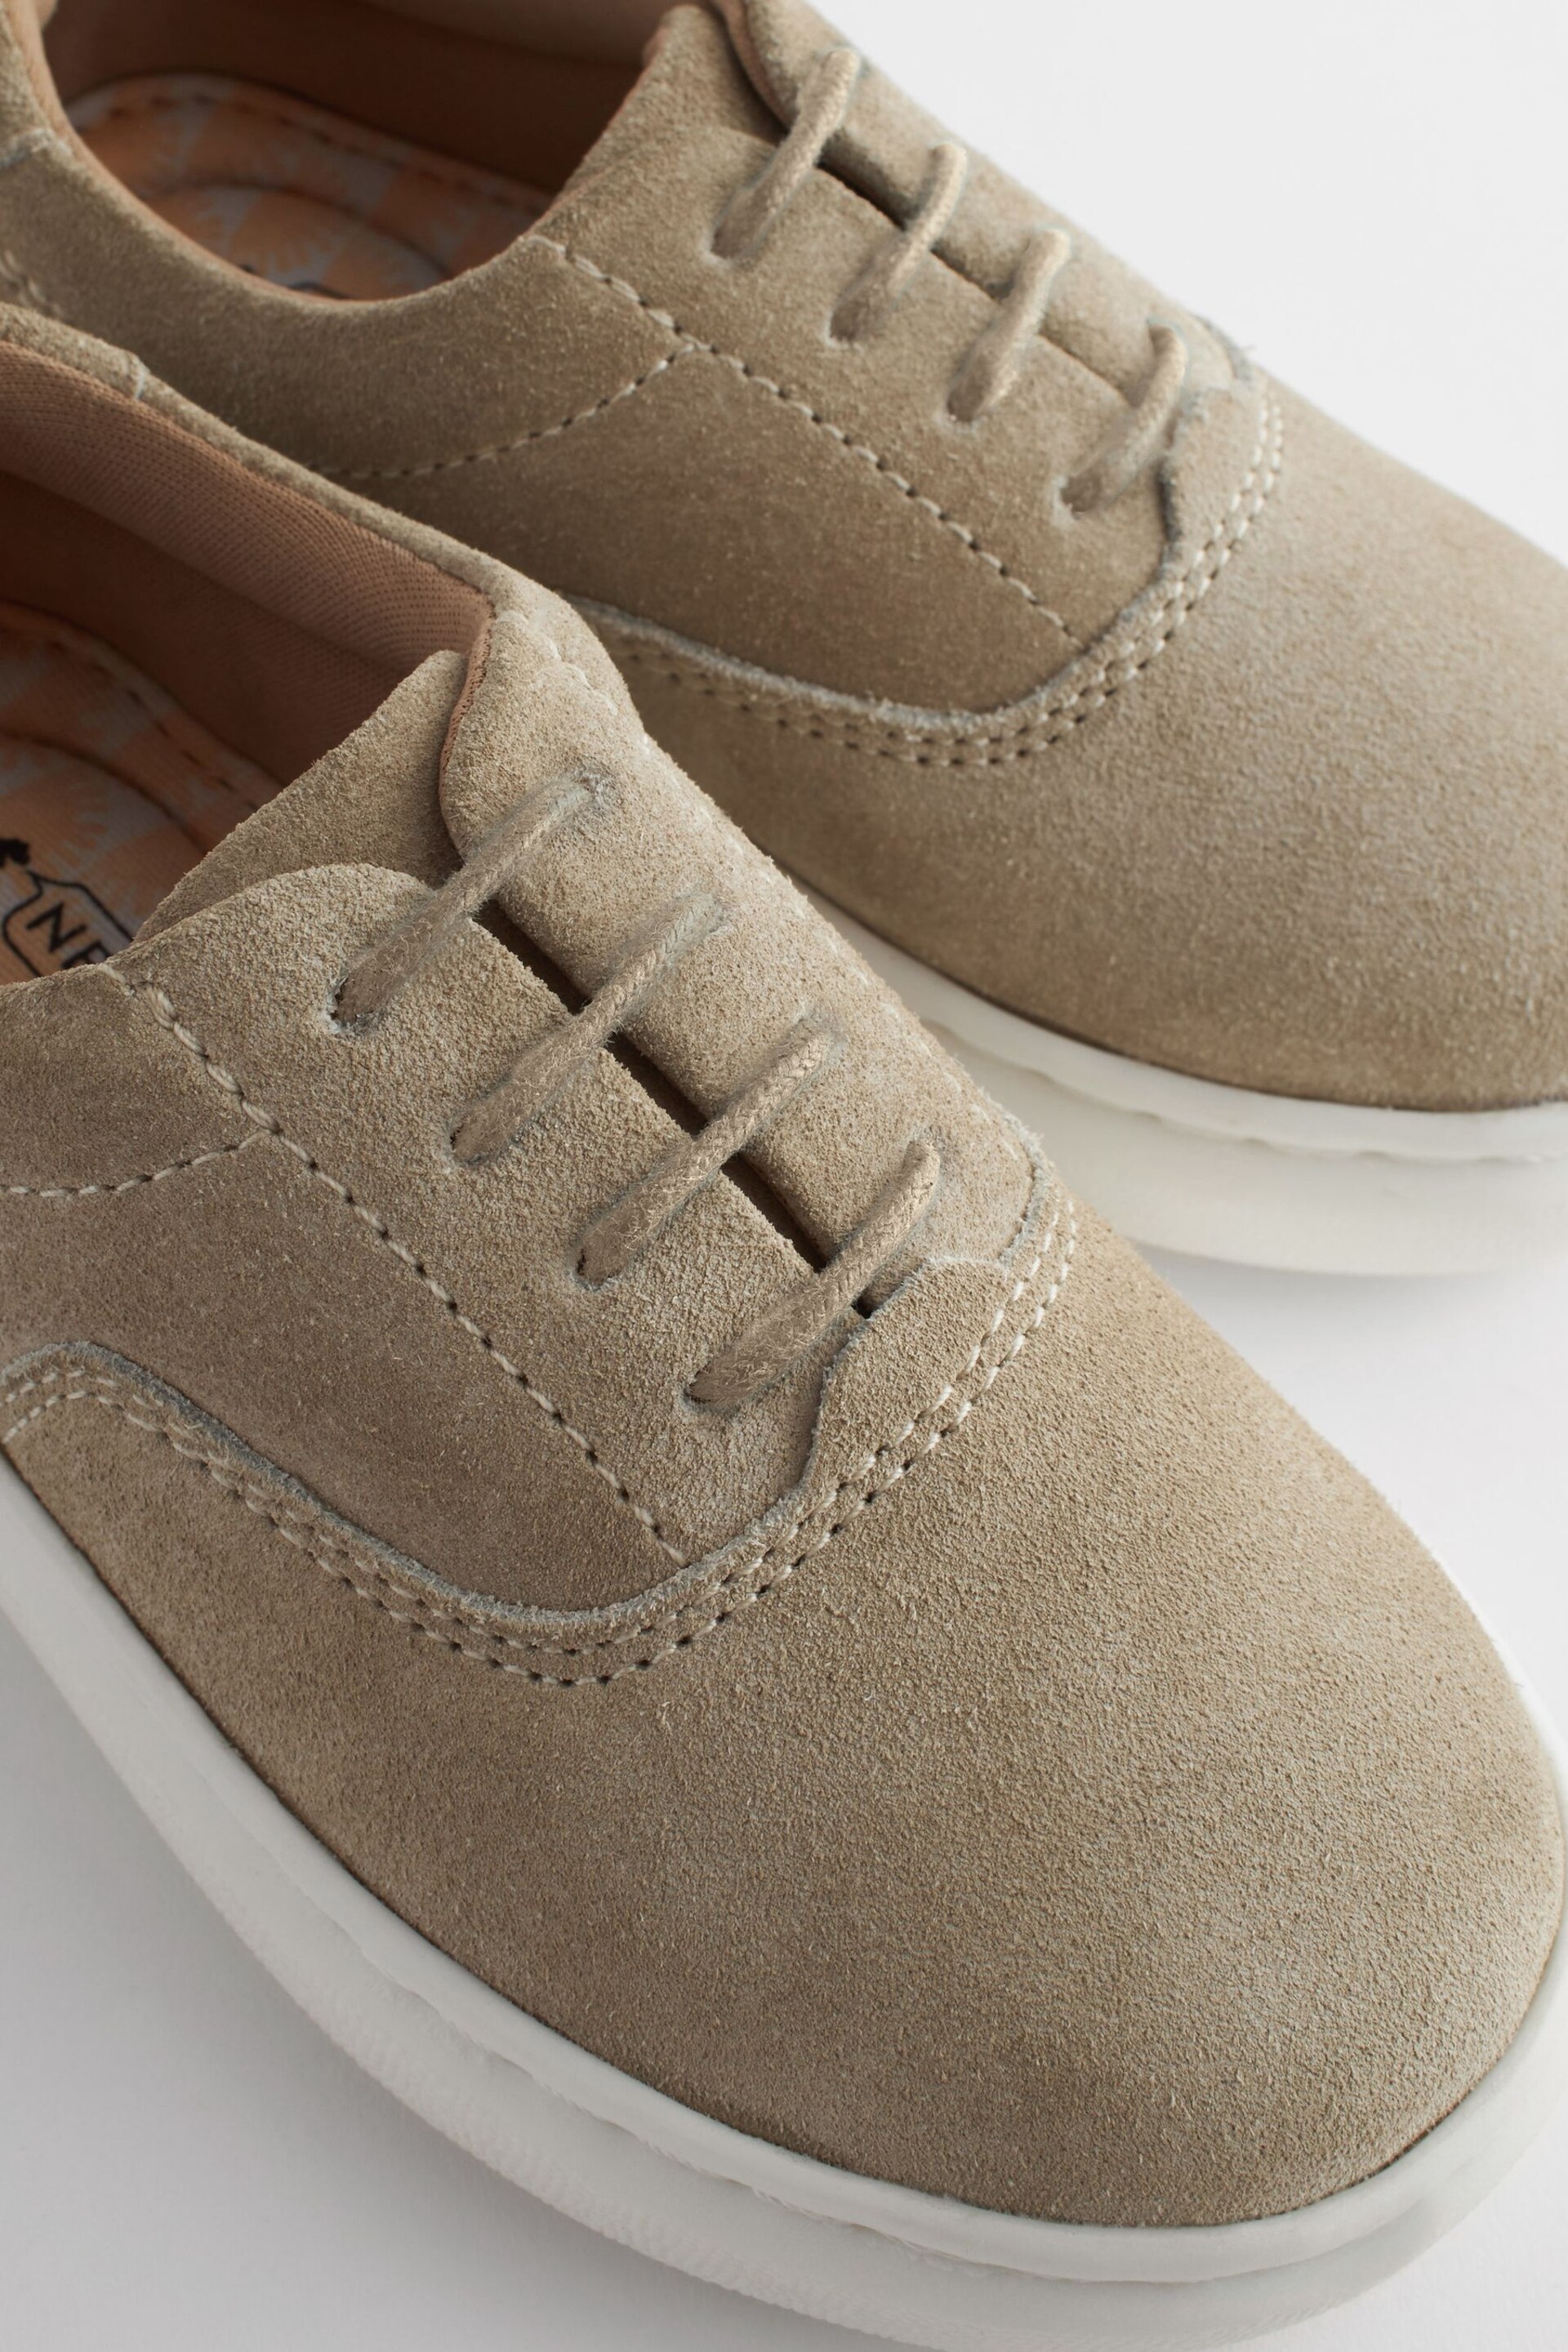 Neutral Stone Smart Leather Lace-Up Shoes - Image 8 of 8